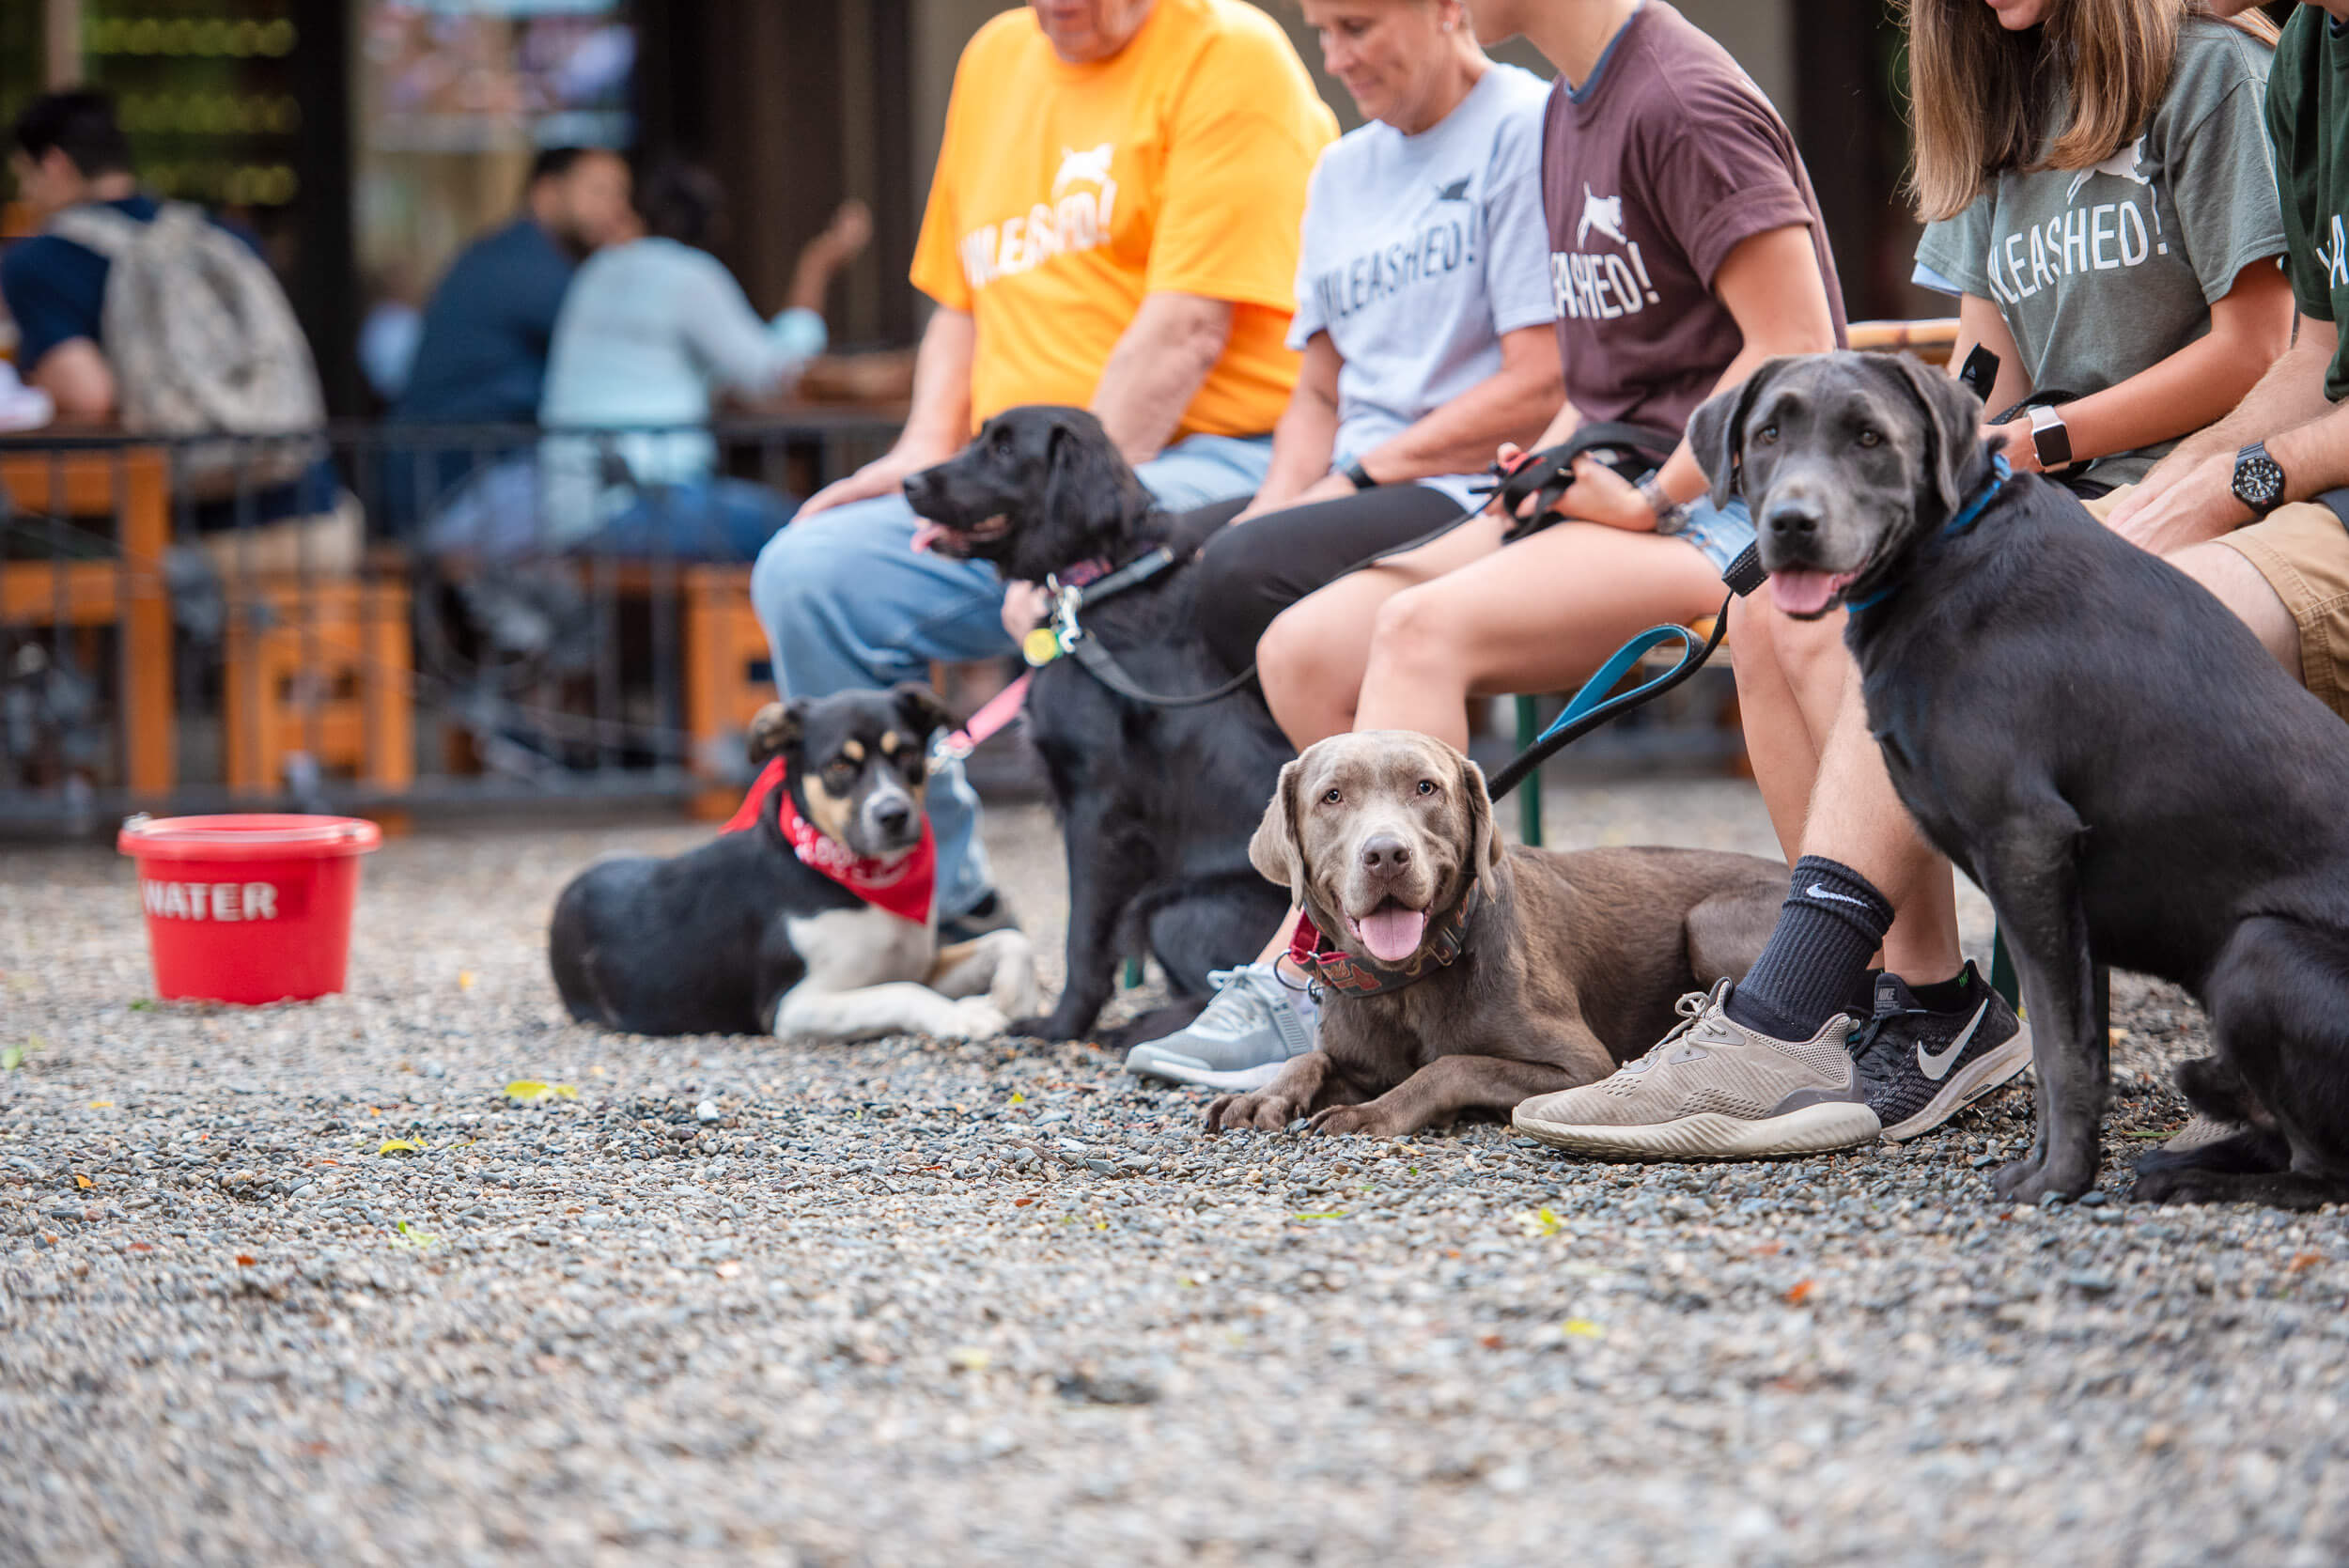 4 dogs sitting outside a #redbucketclub member restaurant during group dog training.